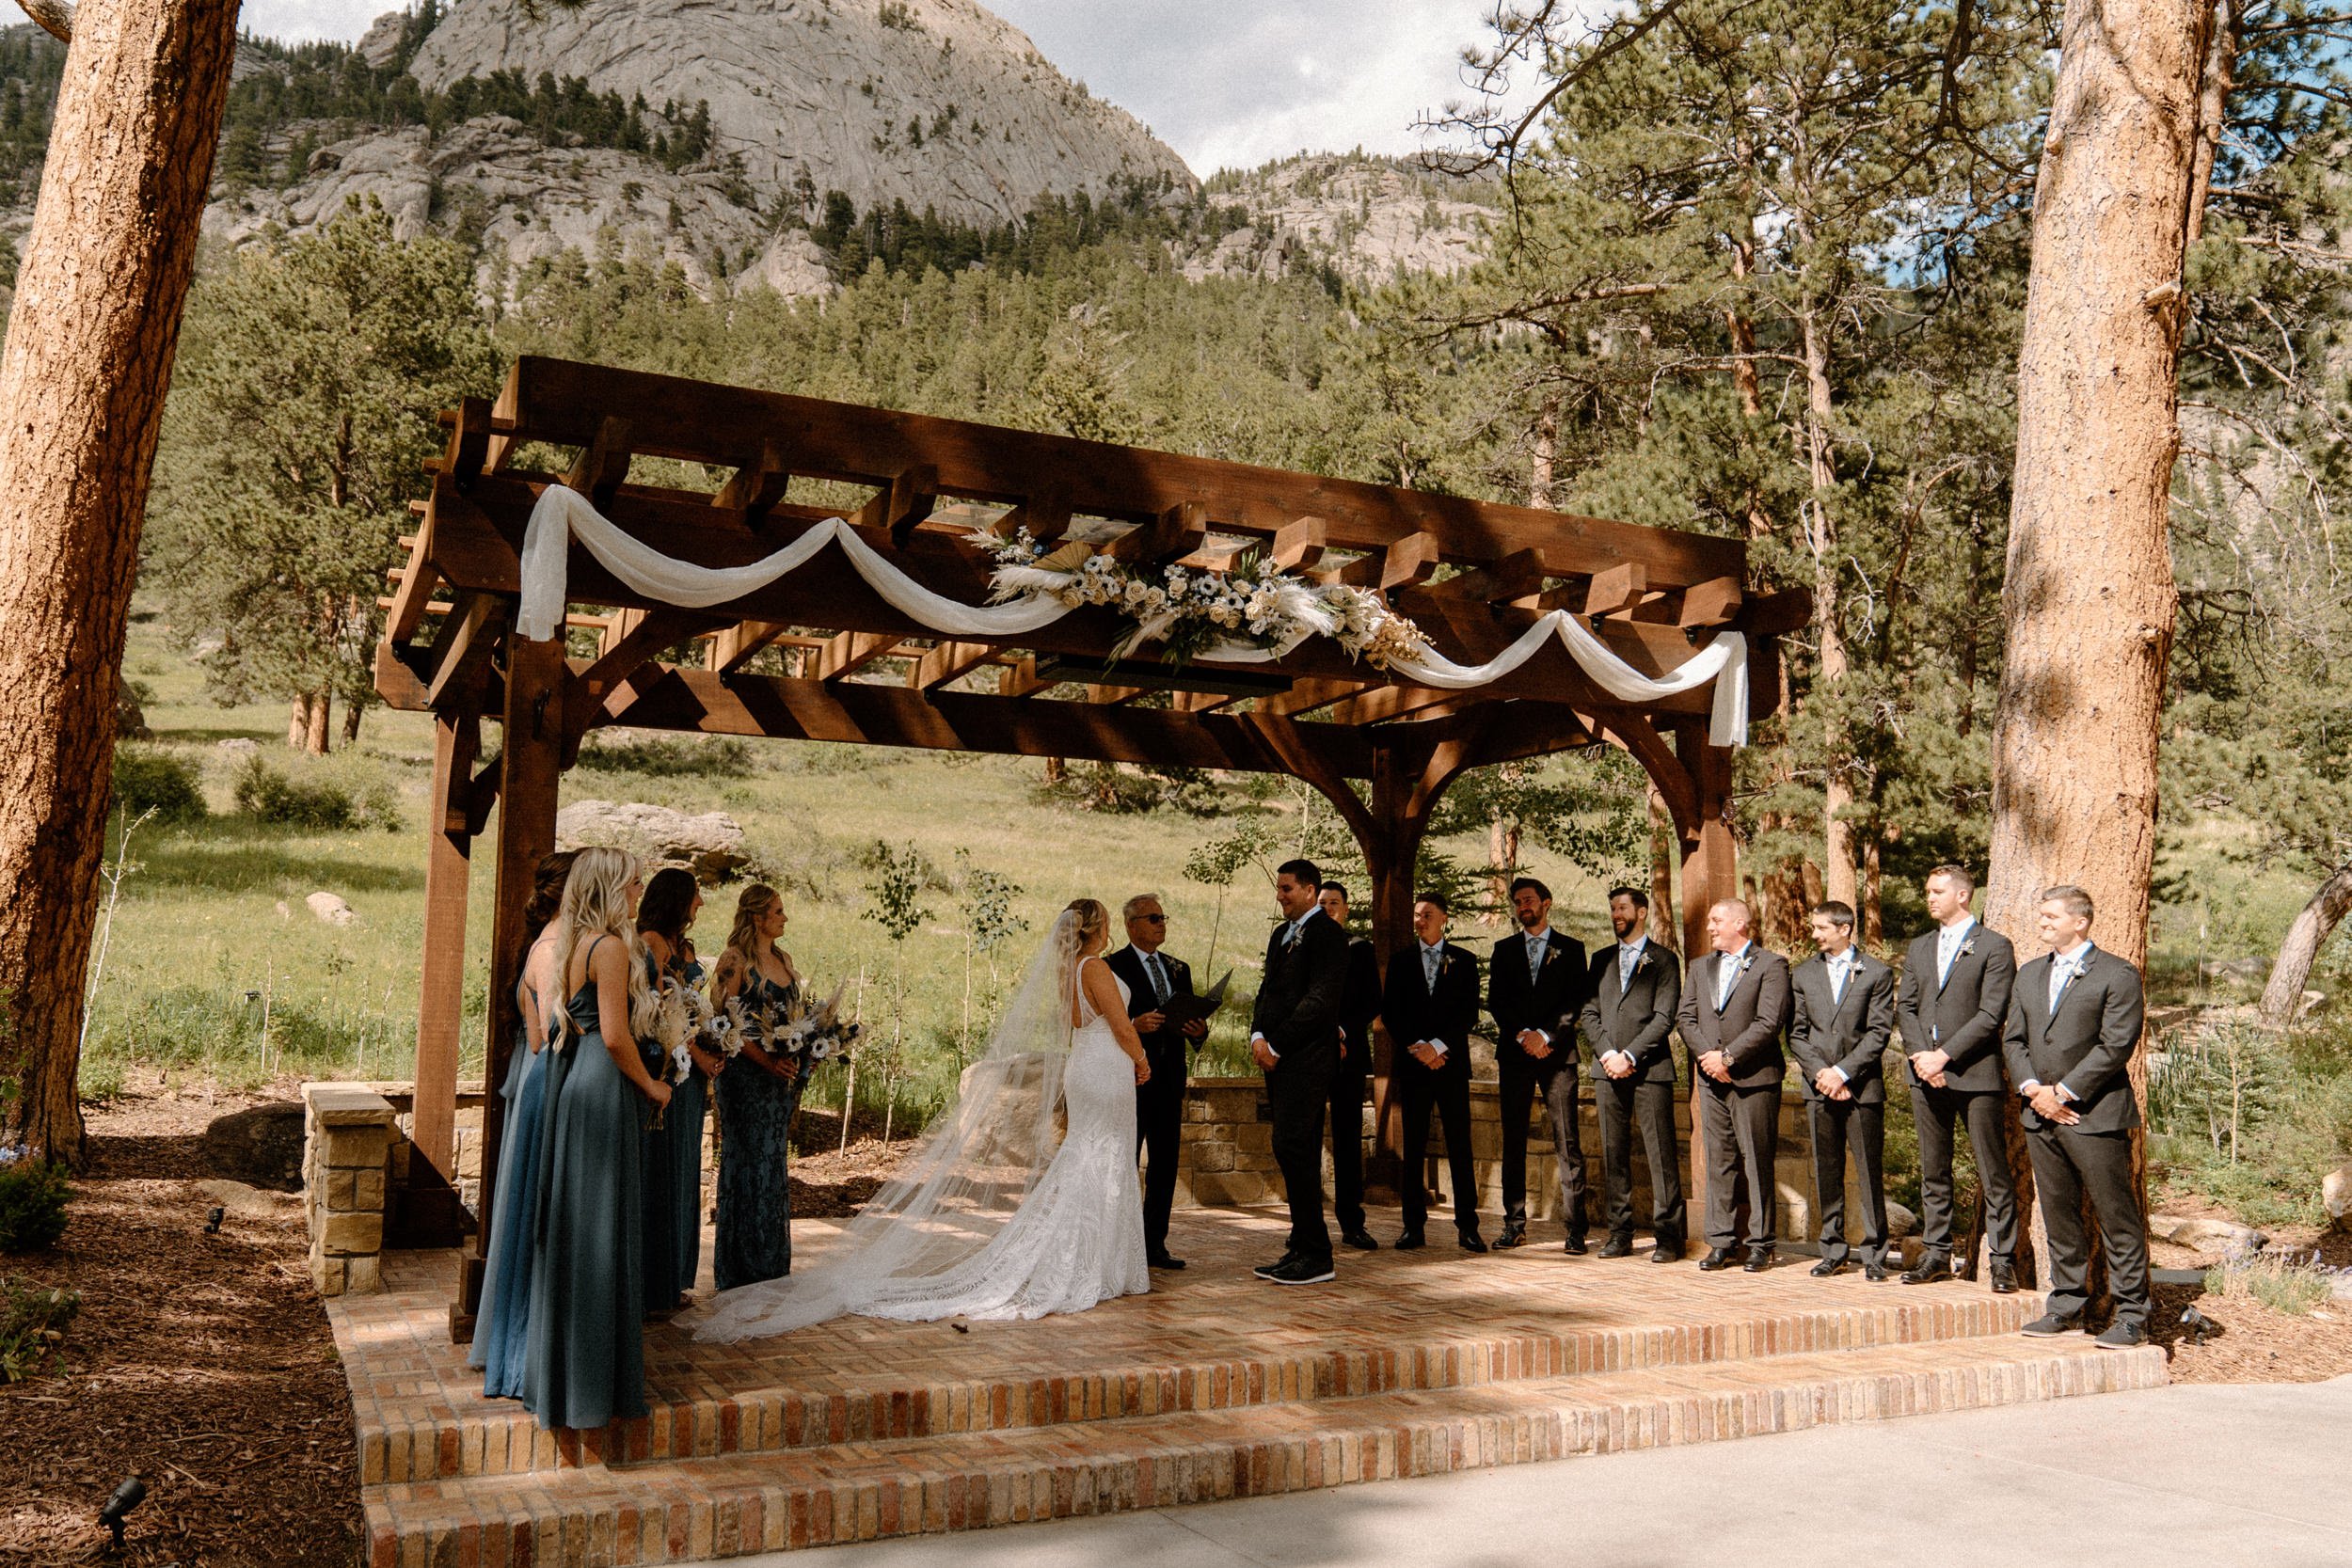 The bride and groom and wedding parties stand at the altar together at the Della Terra Mountain Chateau in Estes Park, CO